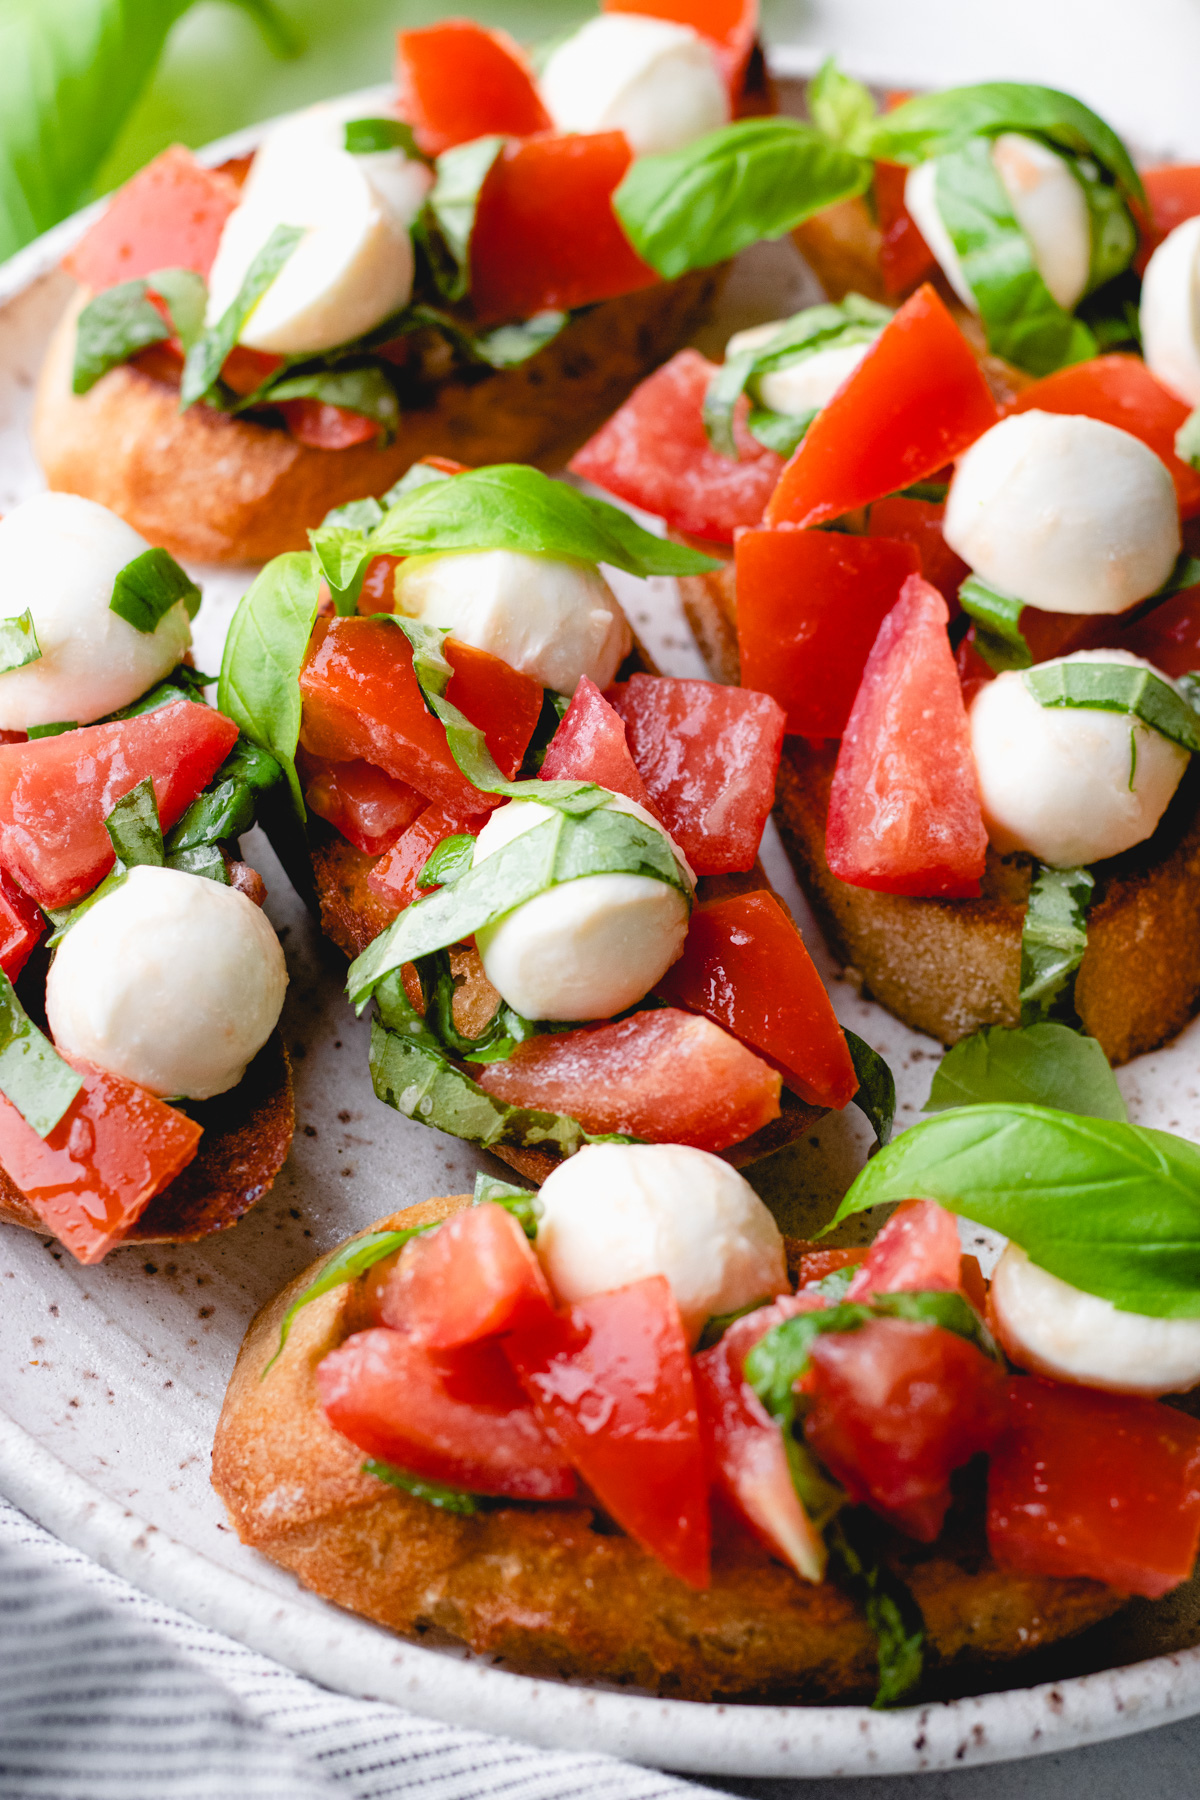 Bread slices, topped with diced tomatoes, mozzarella, and basil.